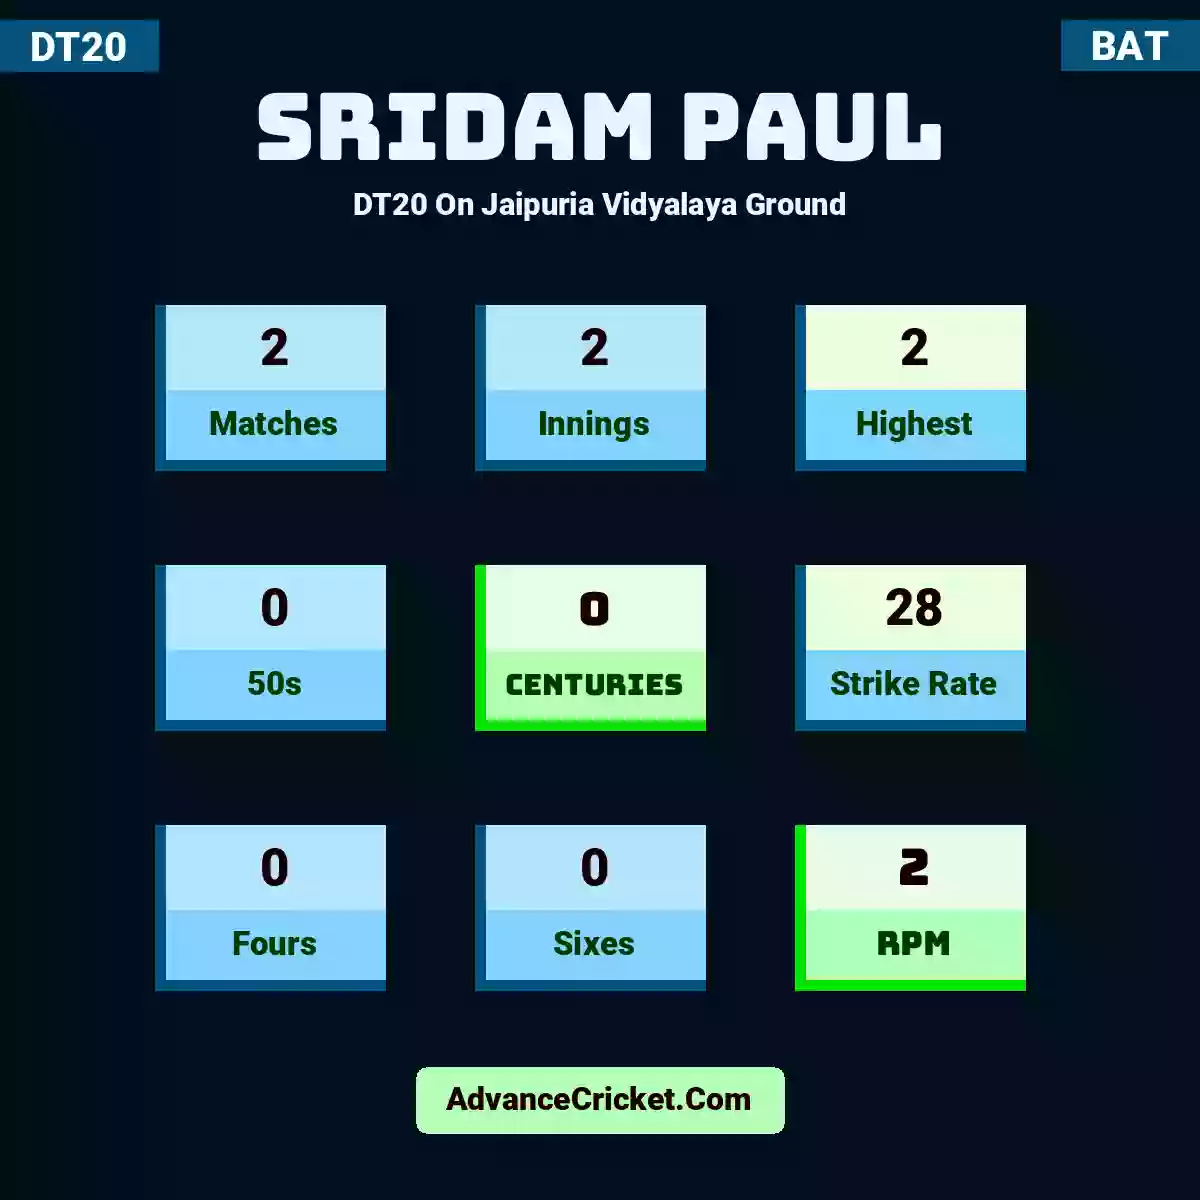 Sridam Paul DT20  On Jaipuria Vidyalaya Ground, Sridam Paul played 2 matches, scored 2 runs as highest, 0 half-centuries, and 0 centuries, with a strike rate of 28. S.Paul hit 0 fours and 0 sixes, with an RPM of 2.